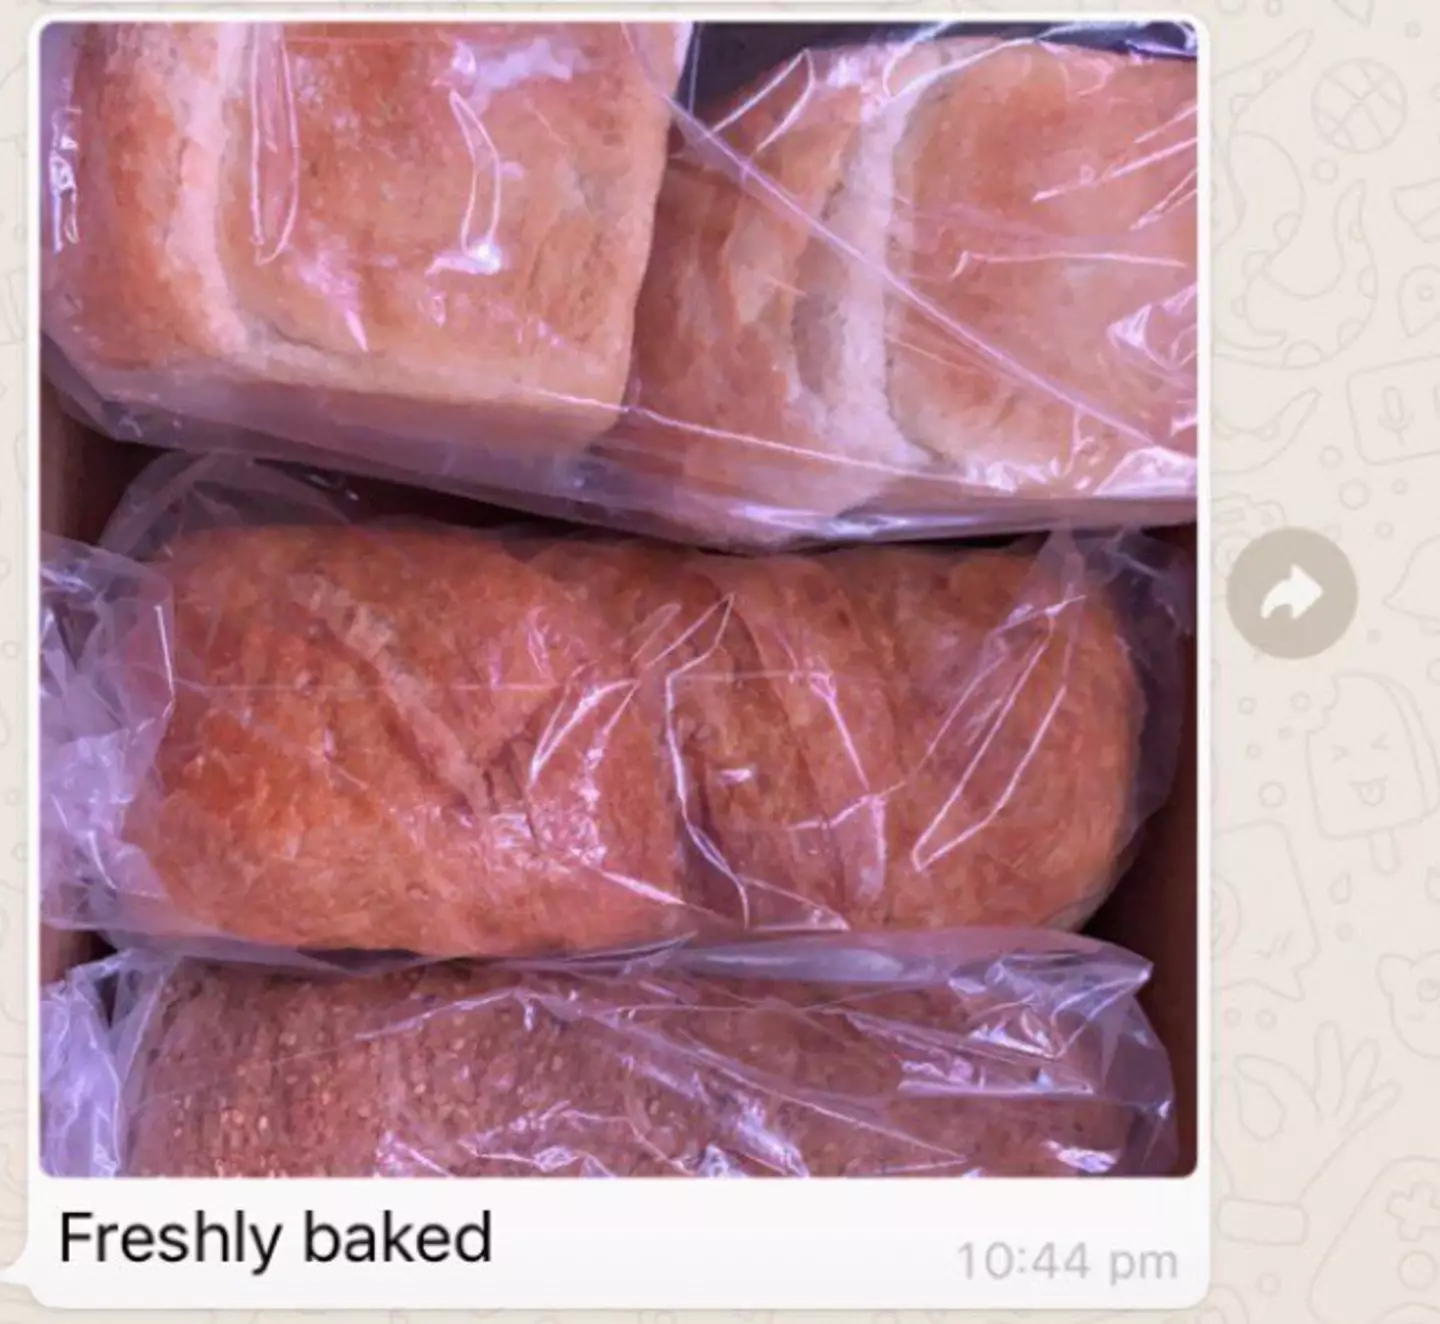 The seller had numerous loaves to choose from.